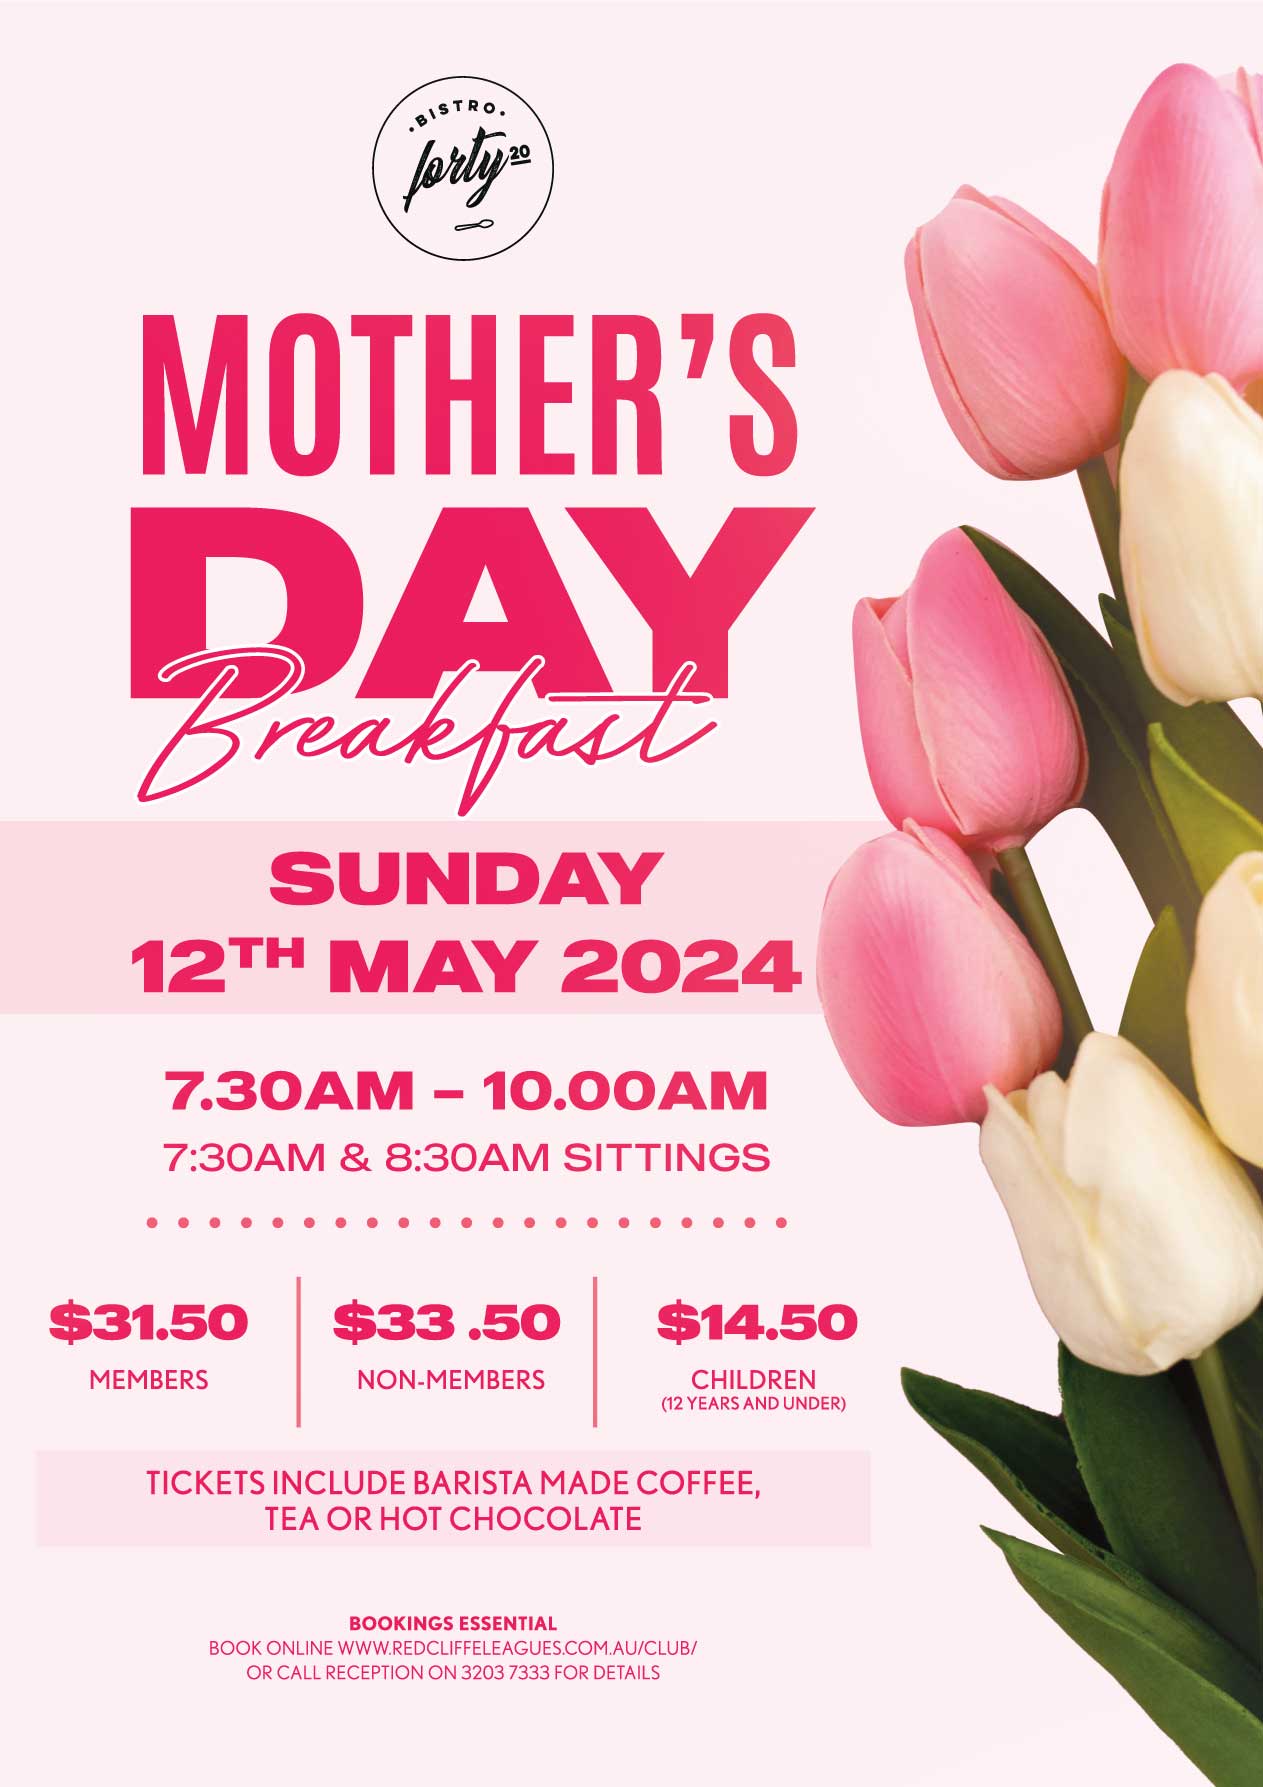 Mothers Day Breakfast 2024 at Dolphins Redcliffe Leagues Club